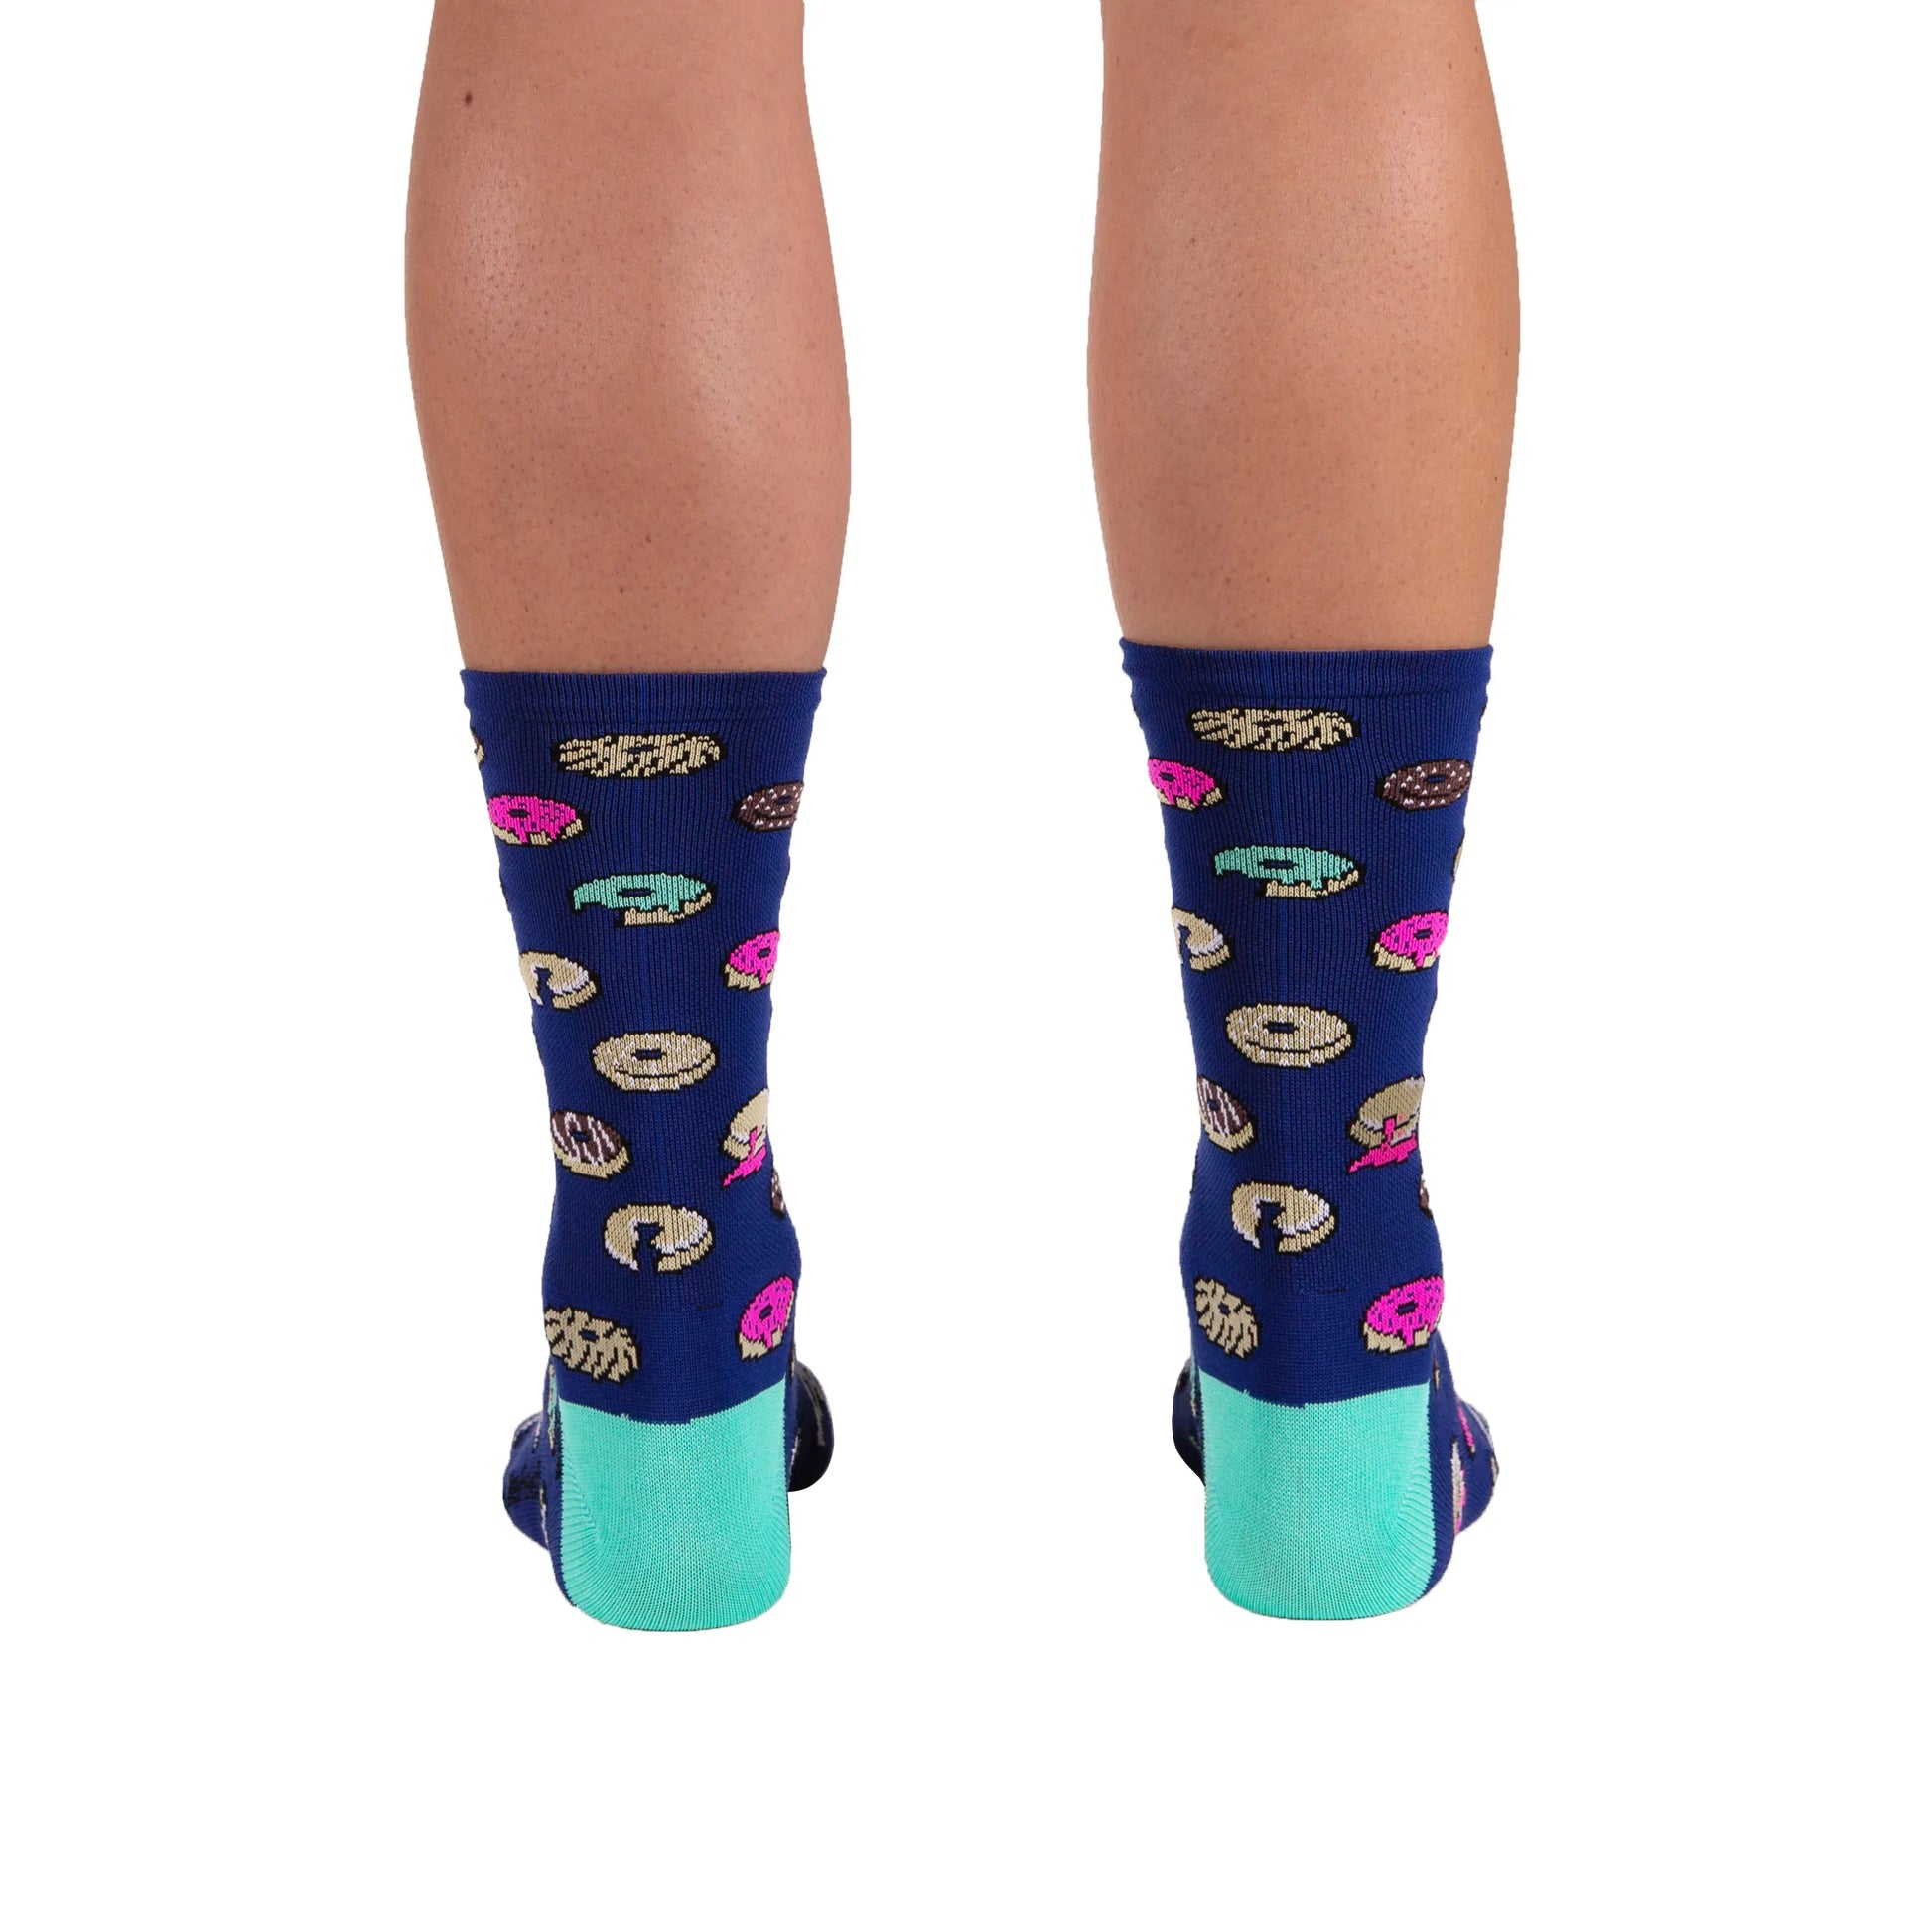 The back of a pair of legs wearing DeFeet Aireator 6” Doughnut cycling sock in light navy with doughnuts on cuff and celeste green heel and toe.